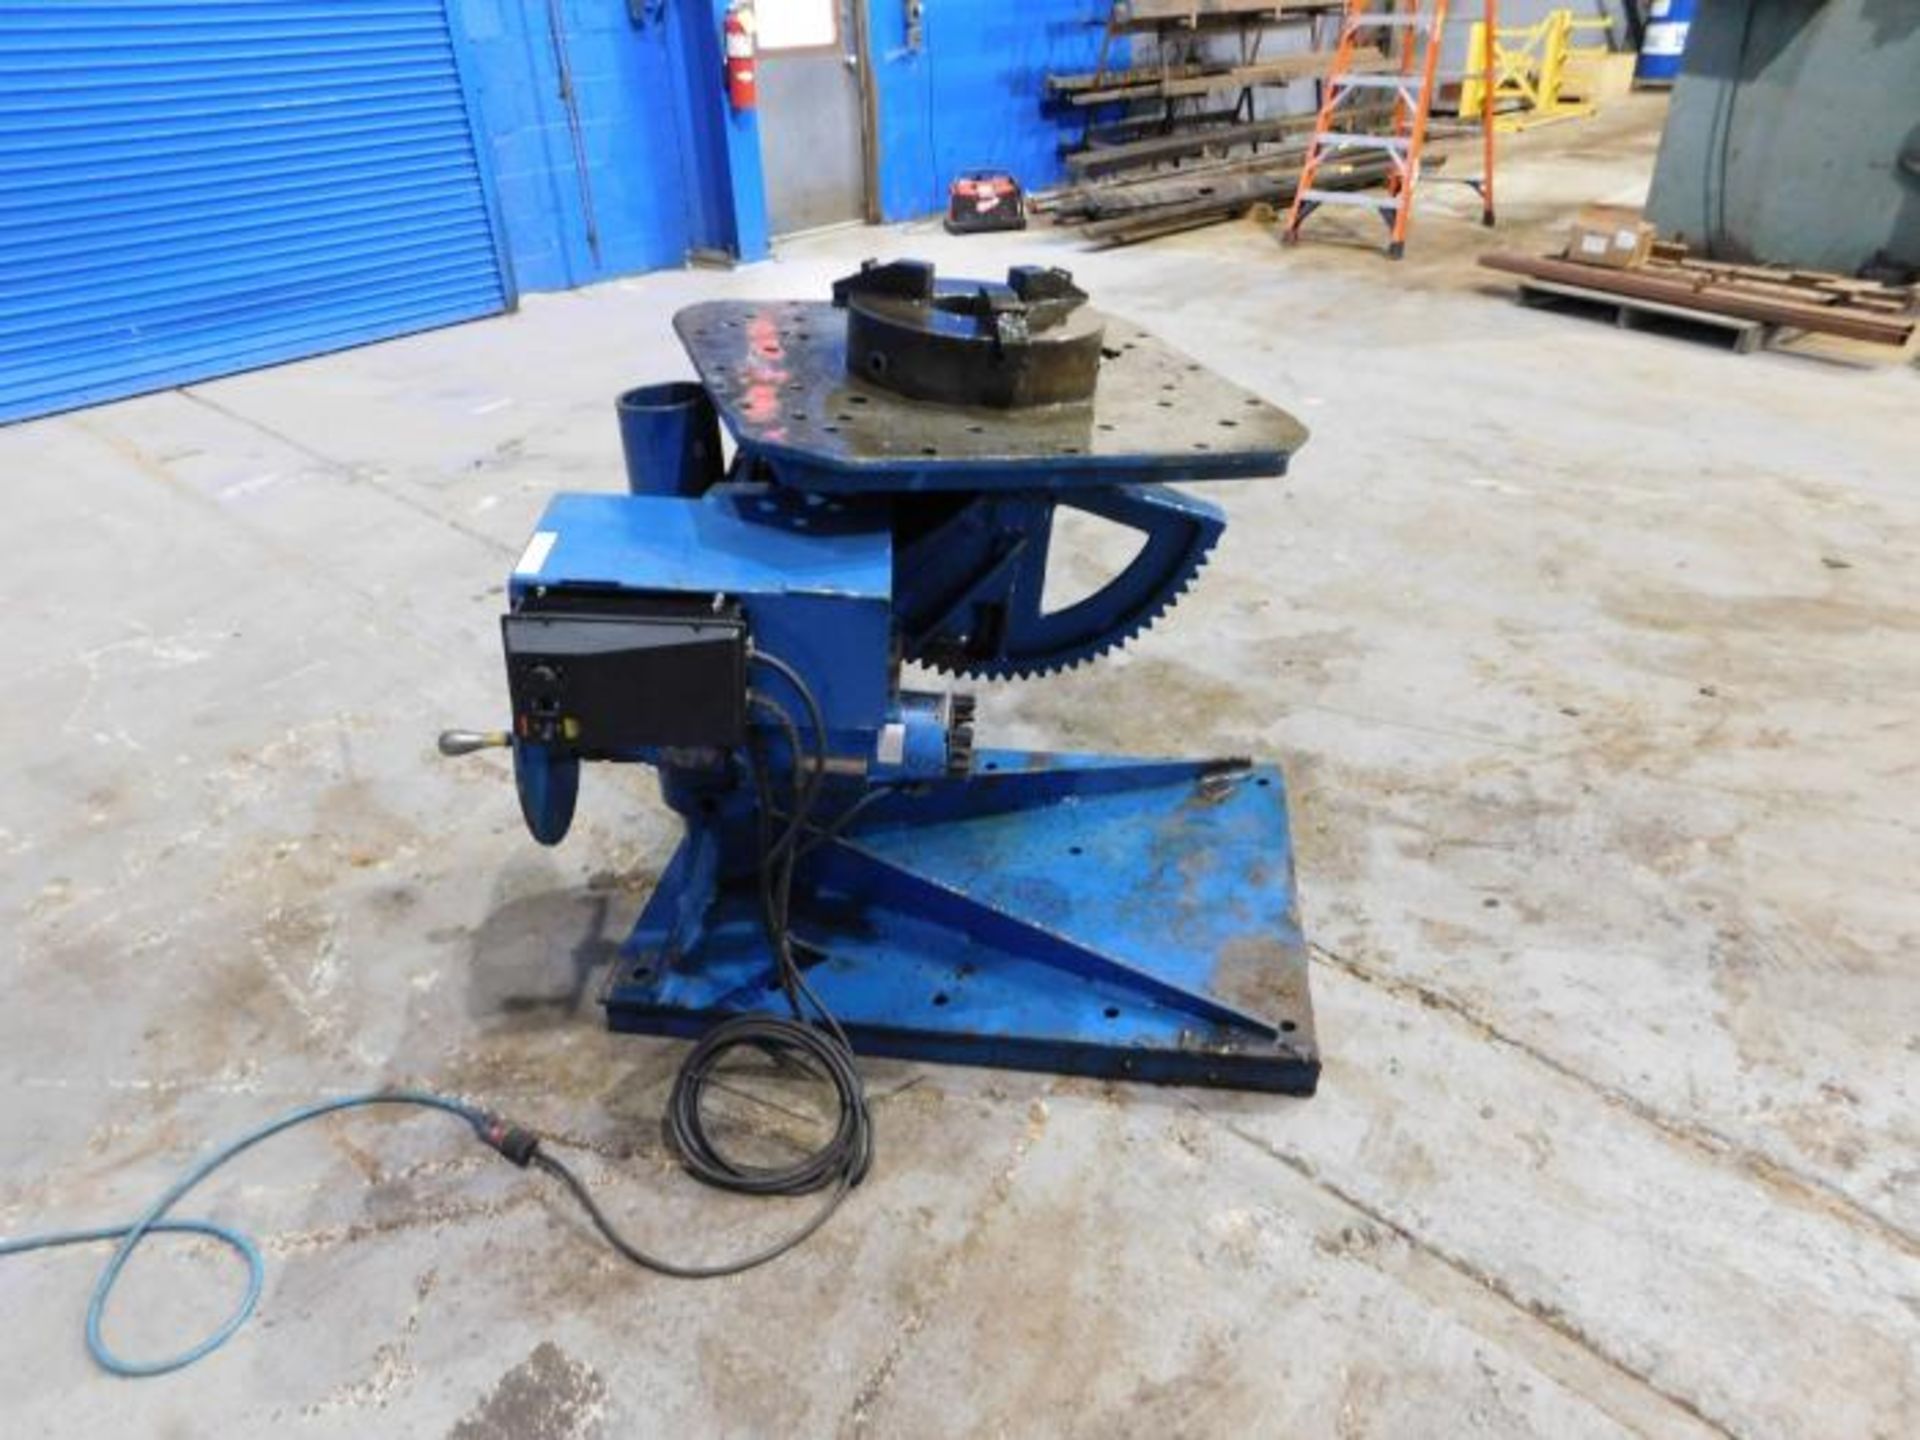 REGISTER TODAY. LARGEST AUCTION SALE OF THE YEAR OF FABRICATION & METALWORKING MACHINERY - Image 4 of 5